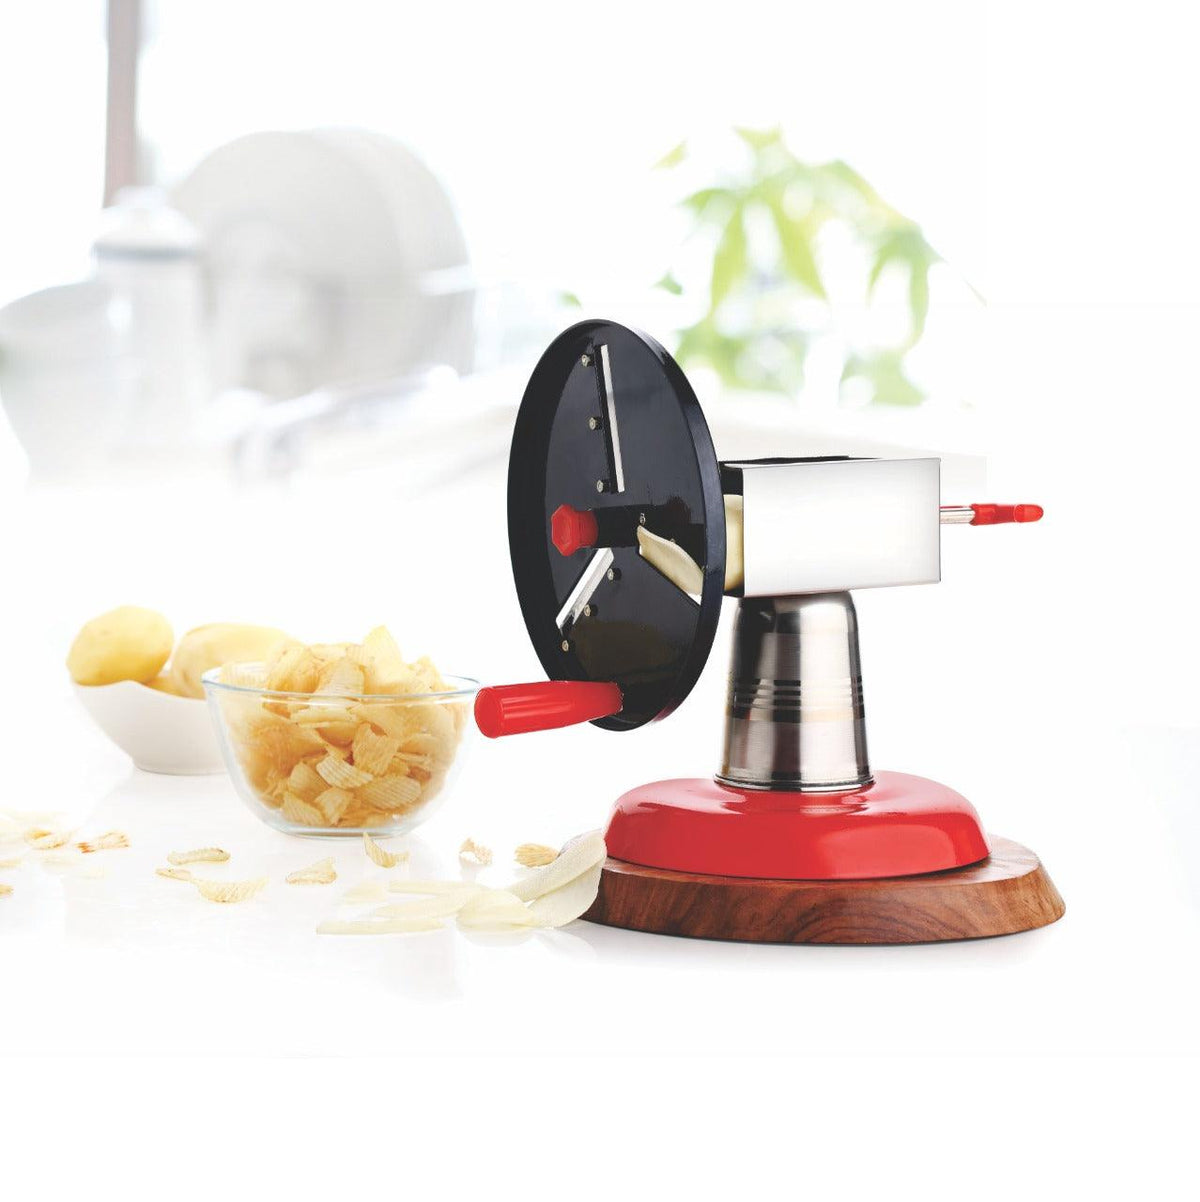 Buy Iron & Stainless Steel Potato Chips Maker Online at Woodentwist ...